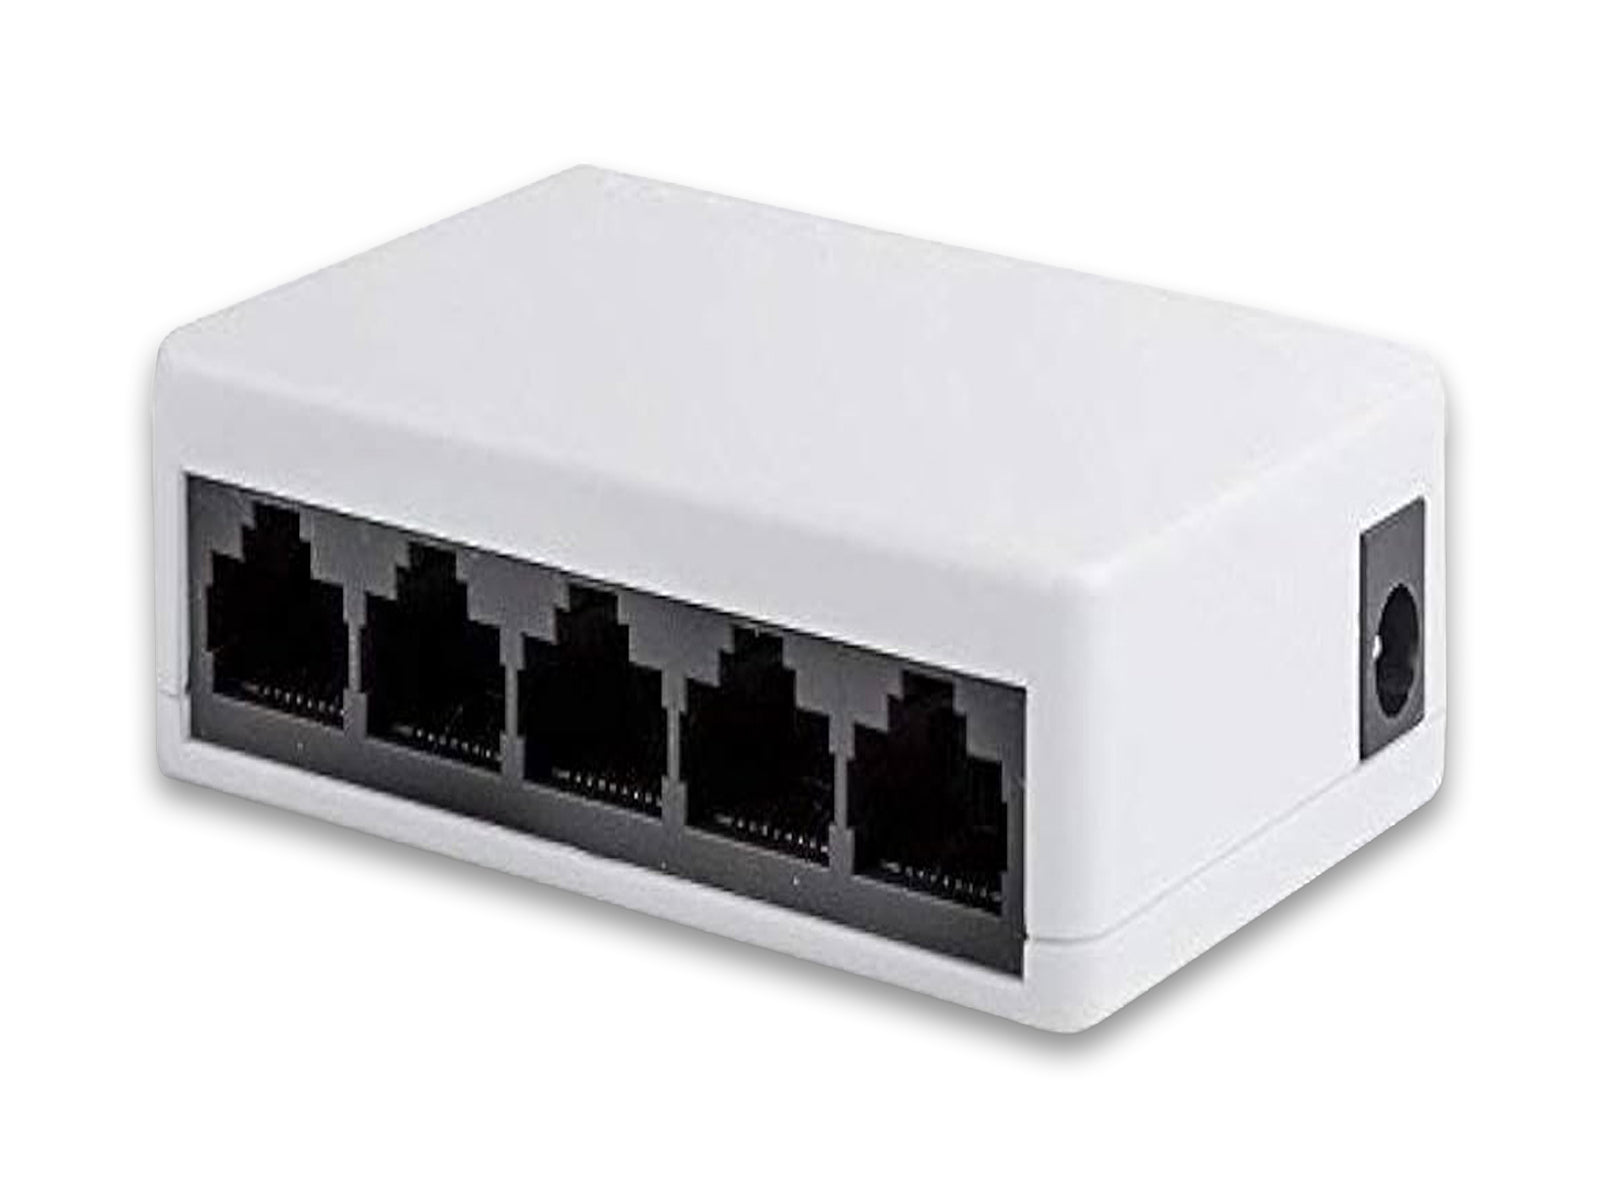 5 Port Network Switch Box Back View